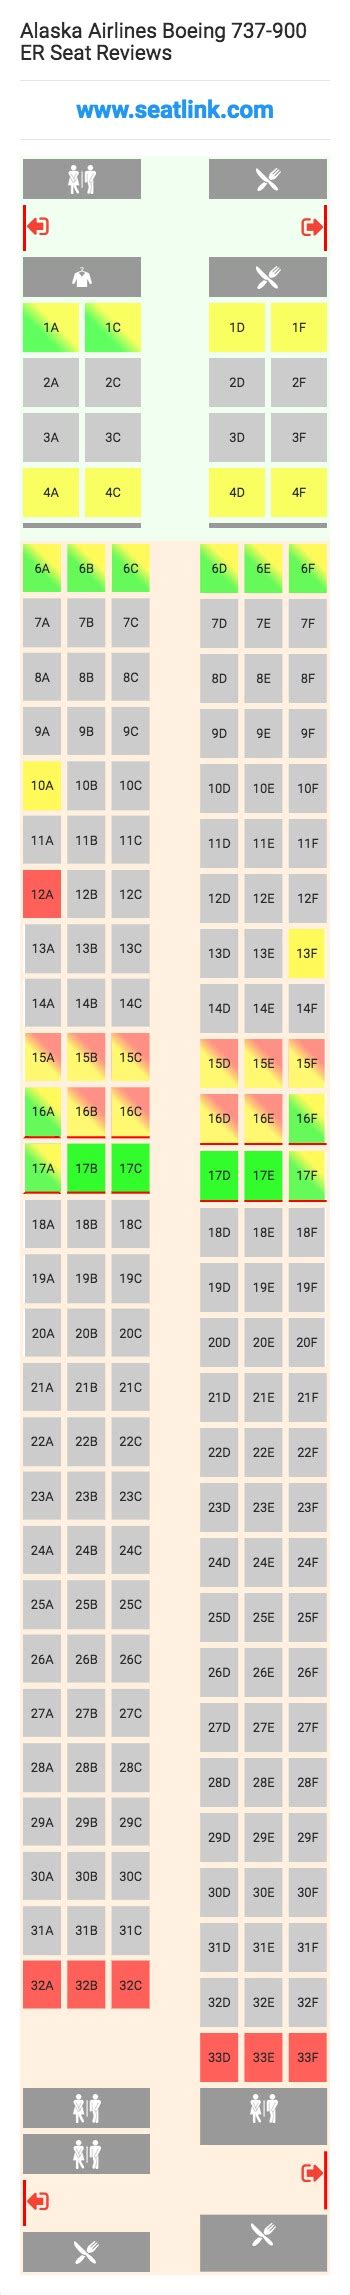 alaska airlines 737-900 seating chart